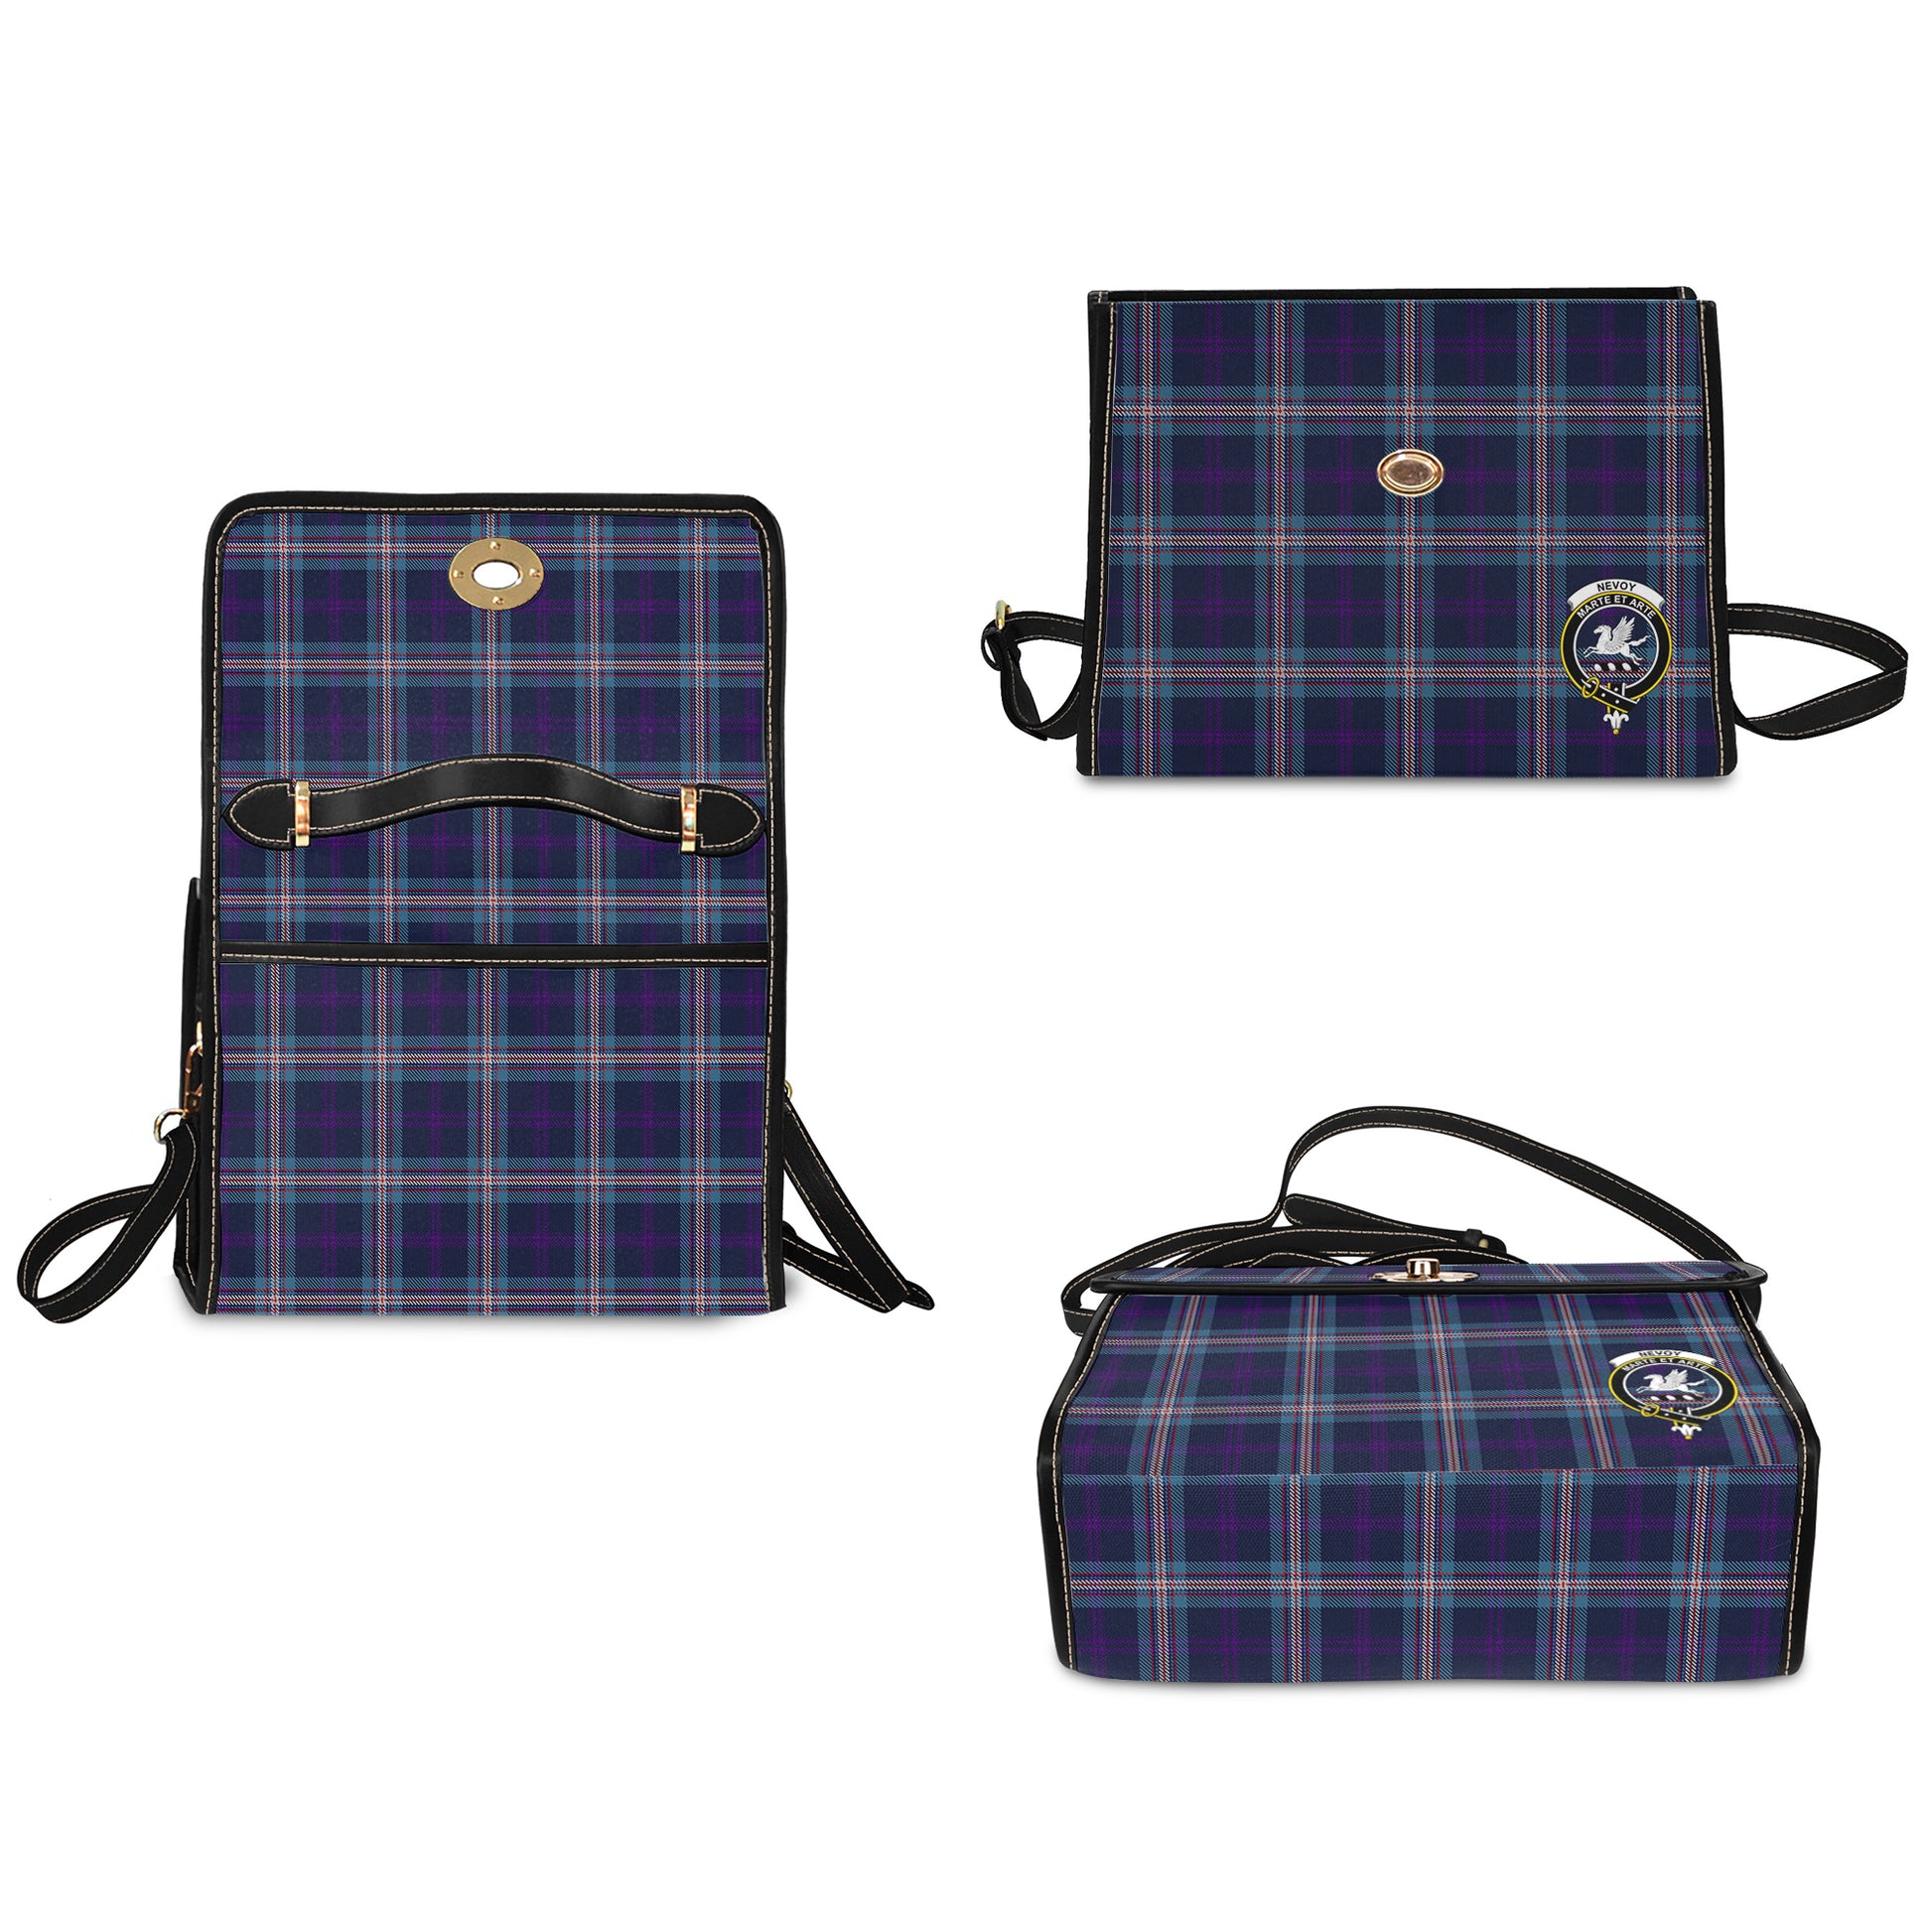 nevoy-tartan-leather-strap-waterproof-canvas-bag-with-family-crest